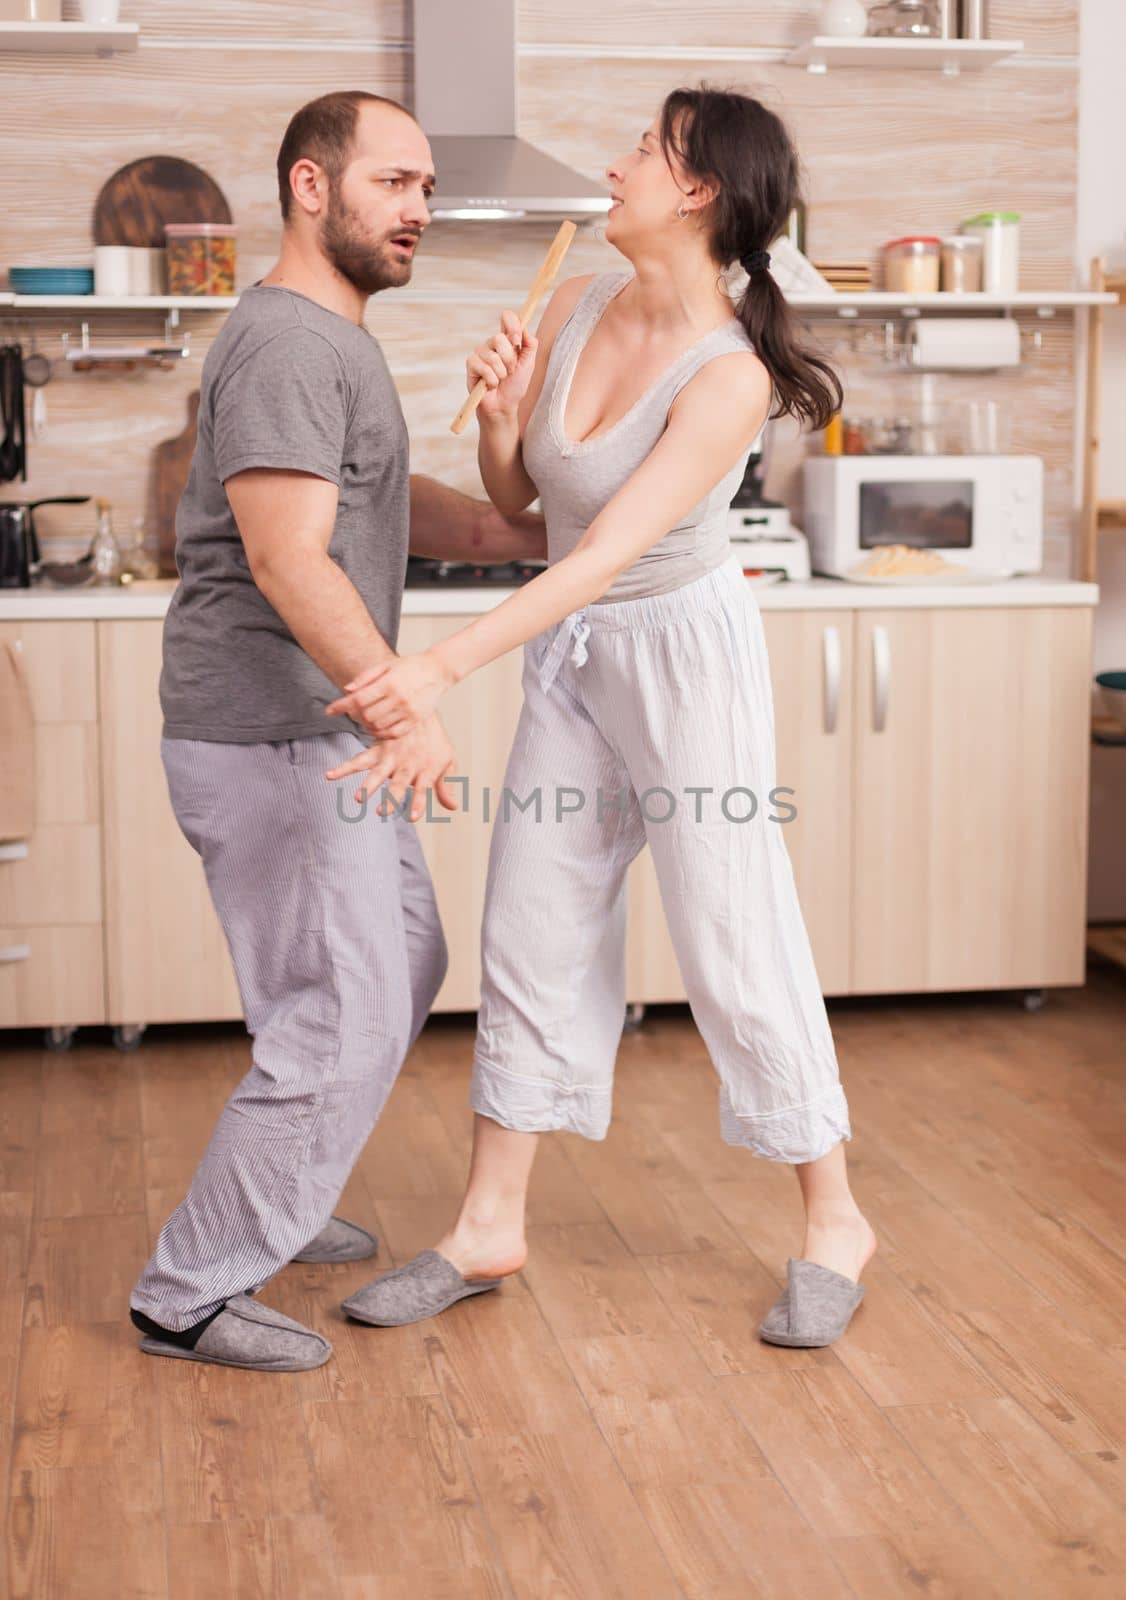 Couple having fun in the kitchen fencing with big spoons during breakfast wearing pajamas. Cheerful carefree joyful funny lovers, fighting wooden spoon, bonding game fight swordplay, happy lifestyle